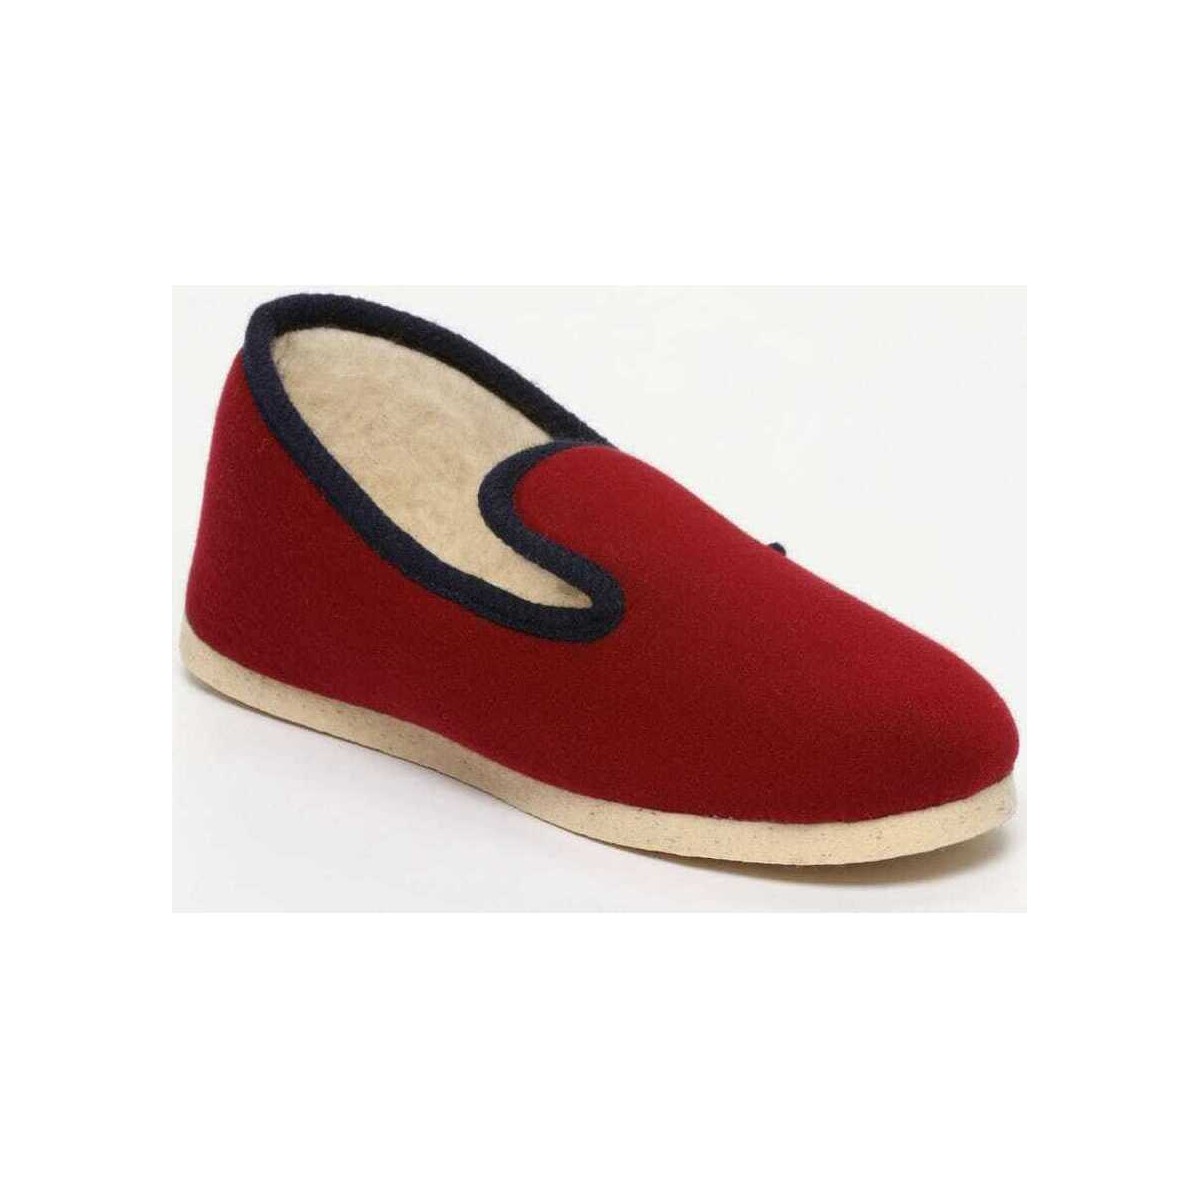 Chaussures Chaussons Guillemets Chaussons PEREC - Rouge Rouge